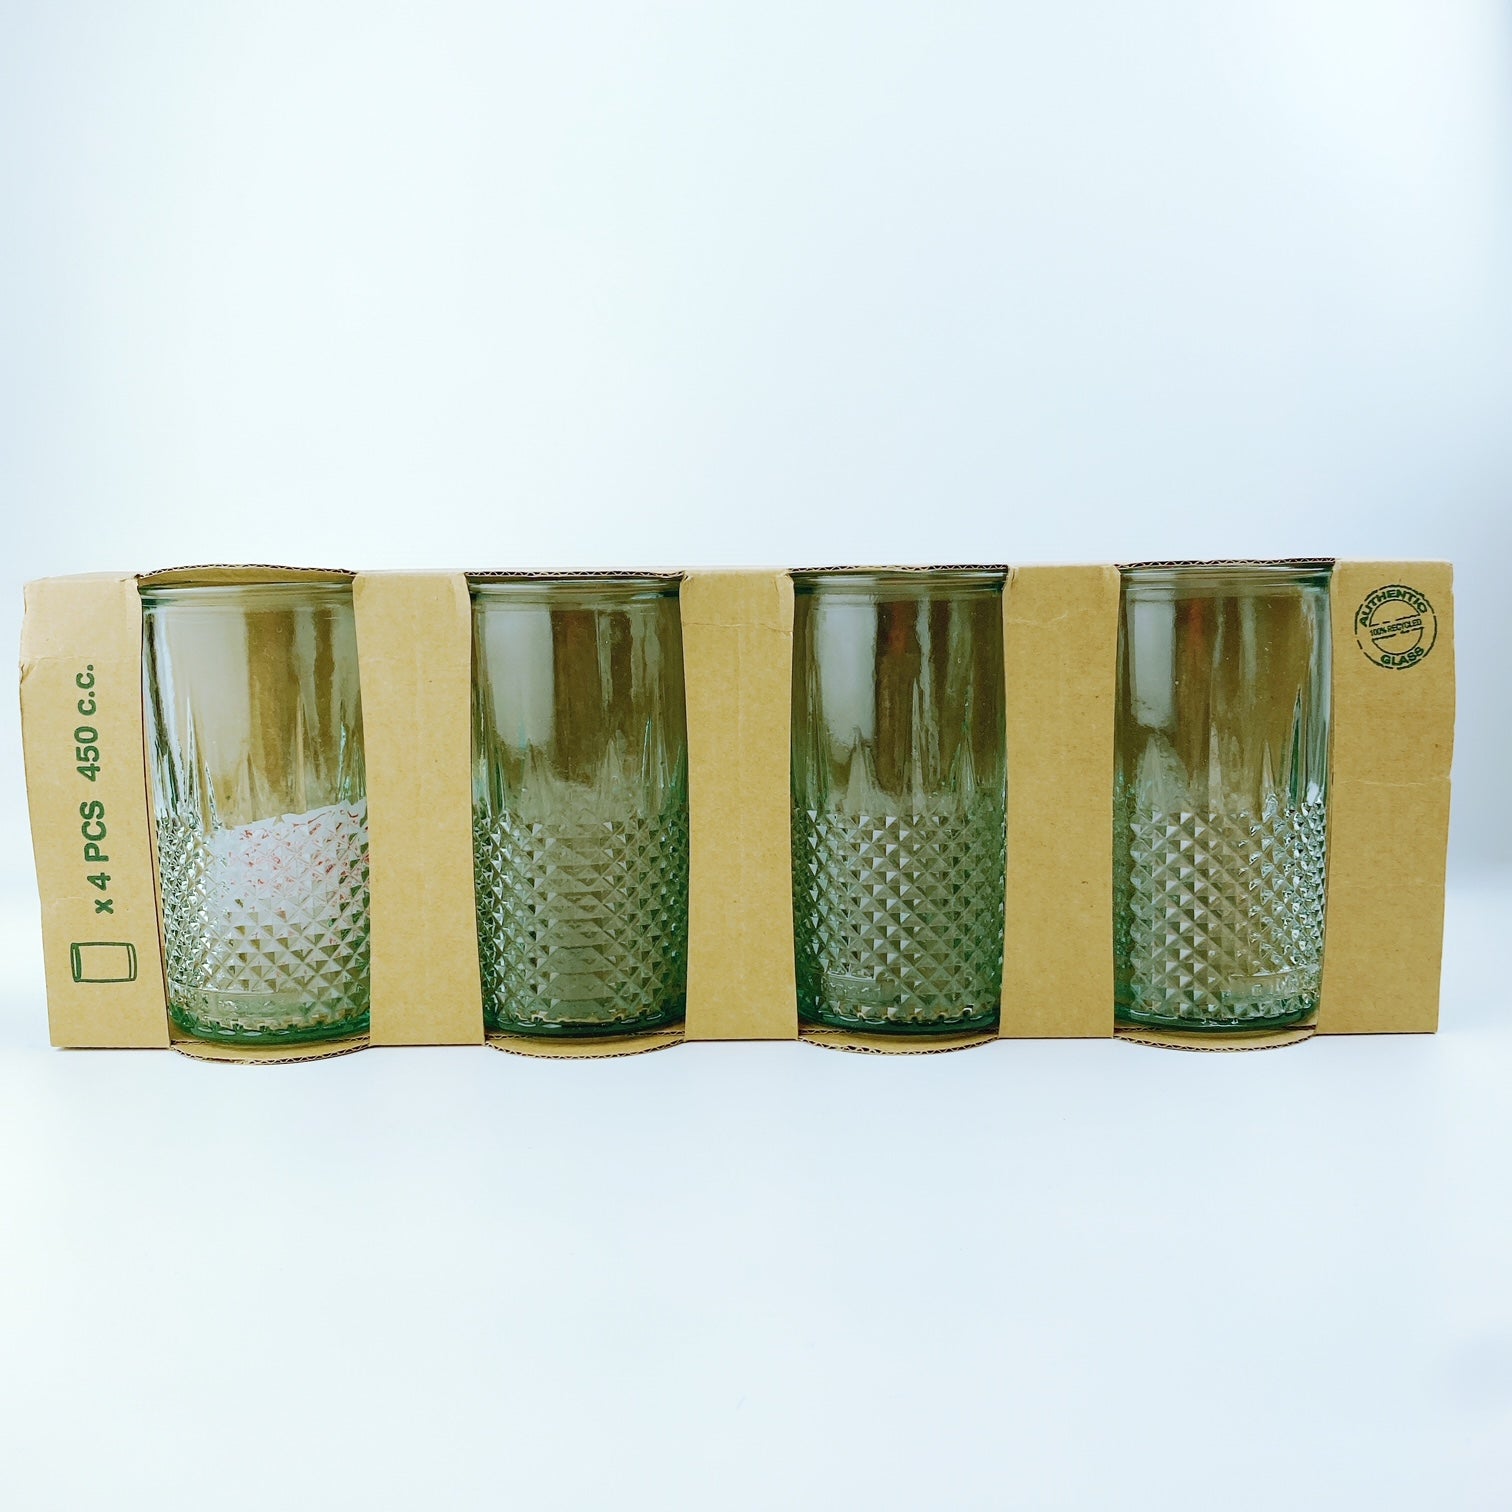 Colored Recycled Drinking Glasses, Set of 4